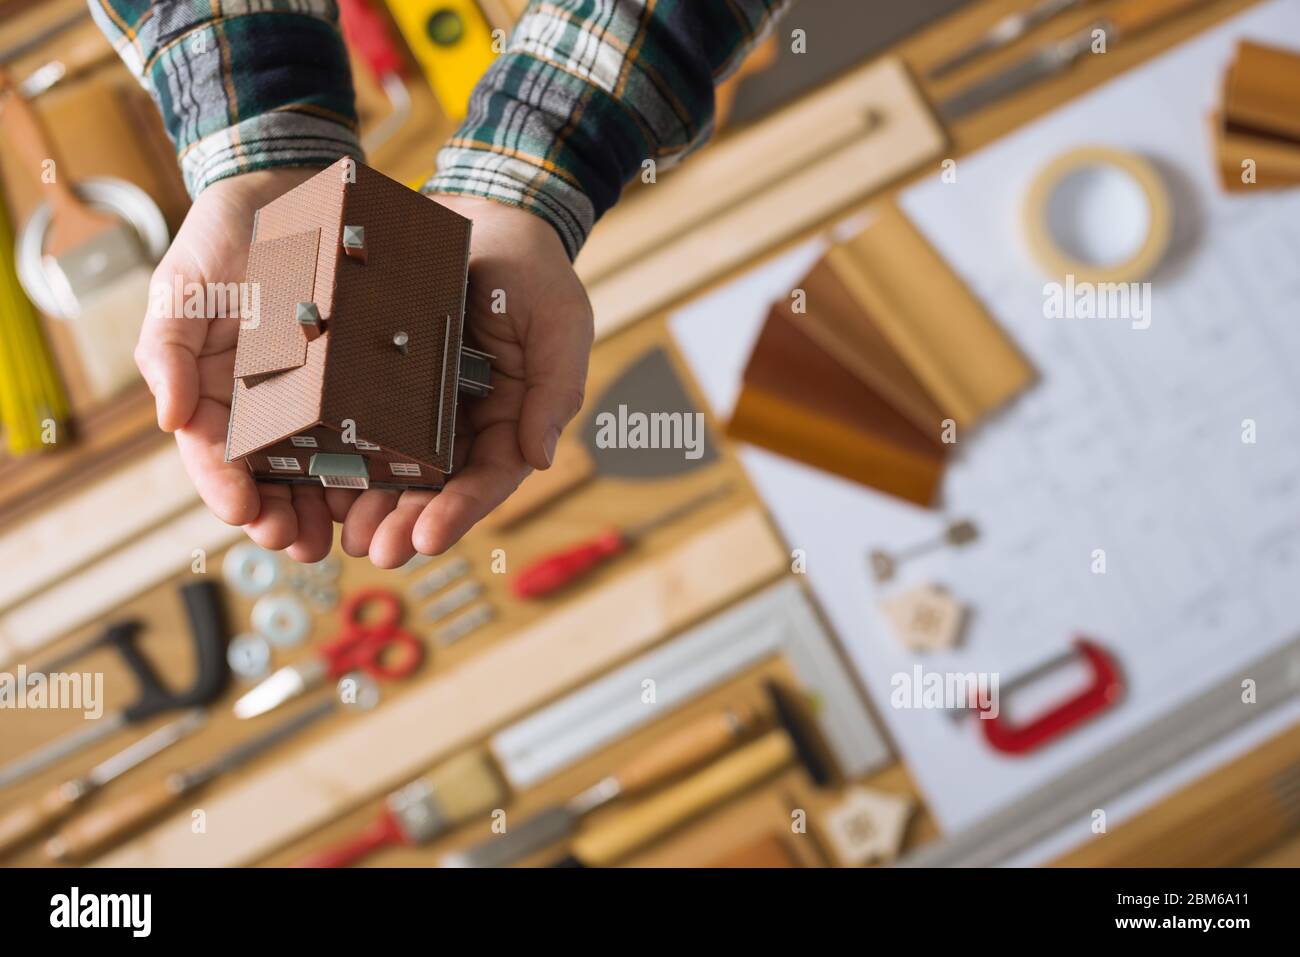 Hands holding a model house, work table with tools and blueprint project on background top view, home insurance concept Stock Photo